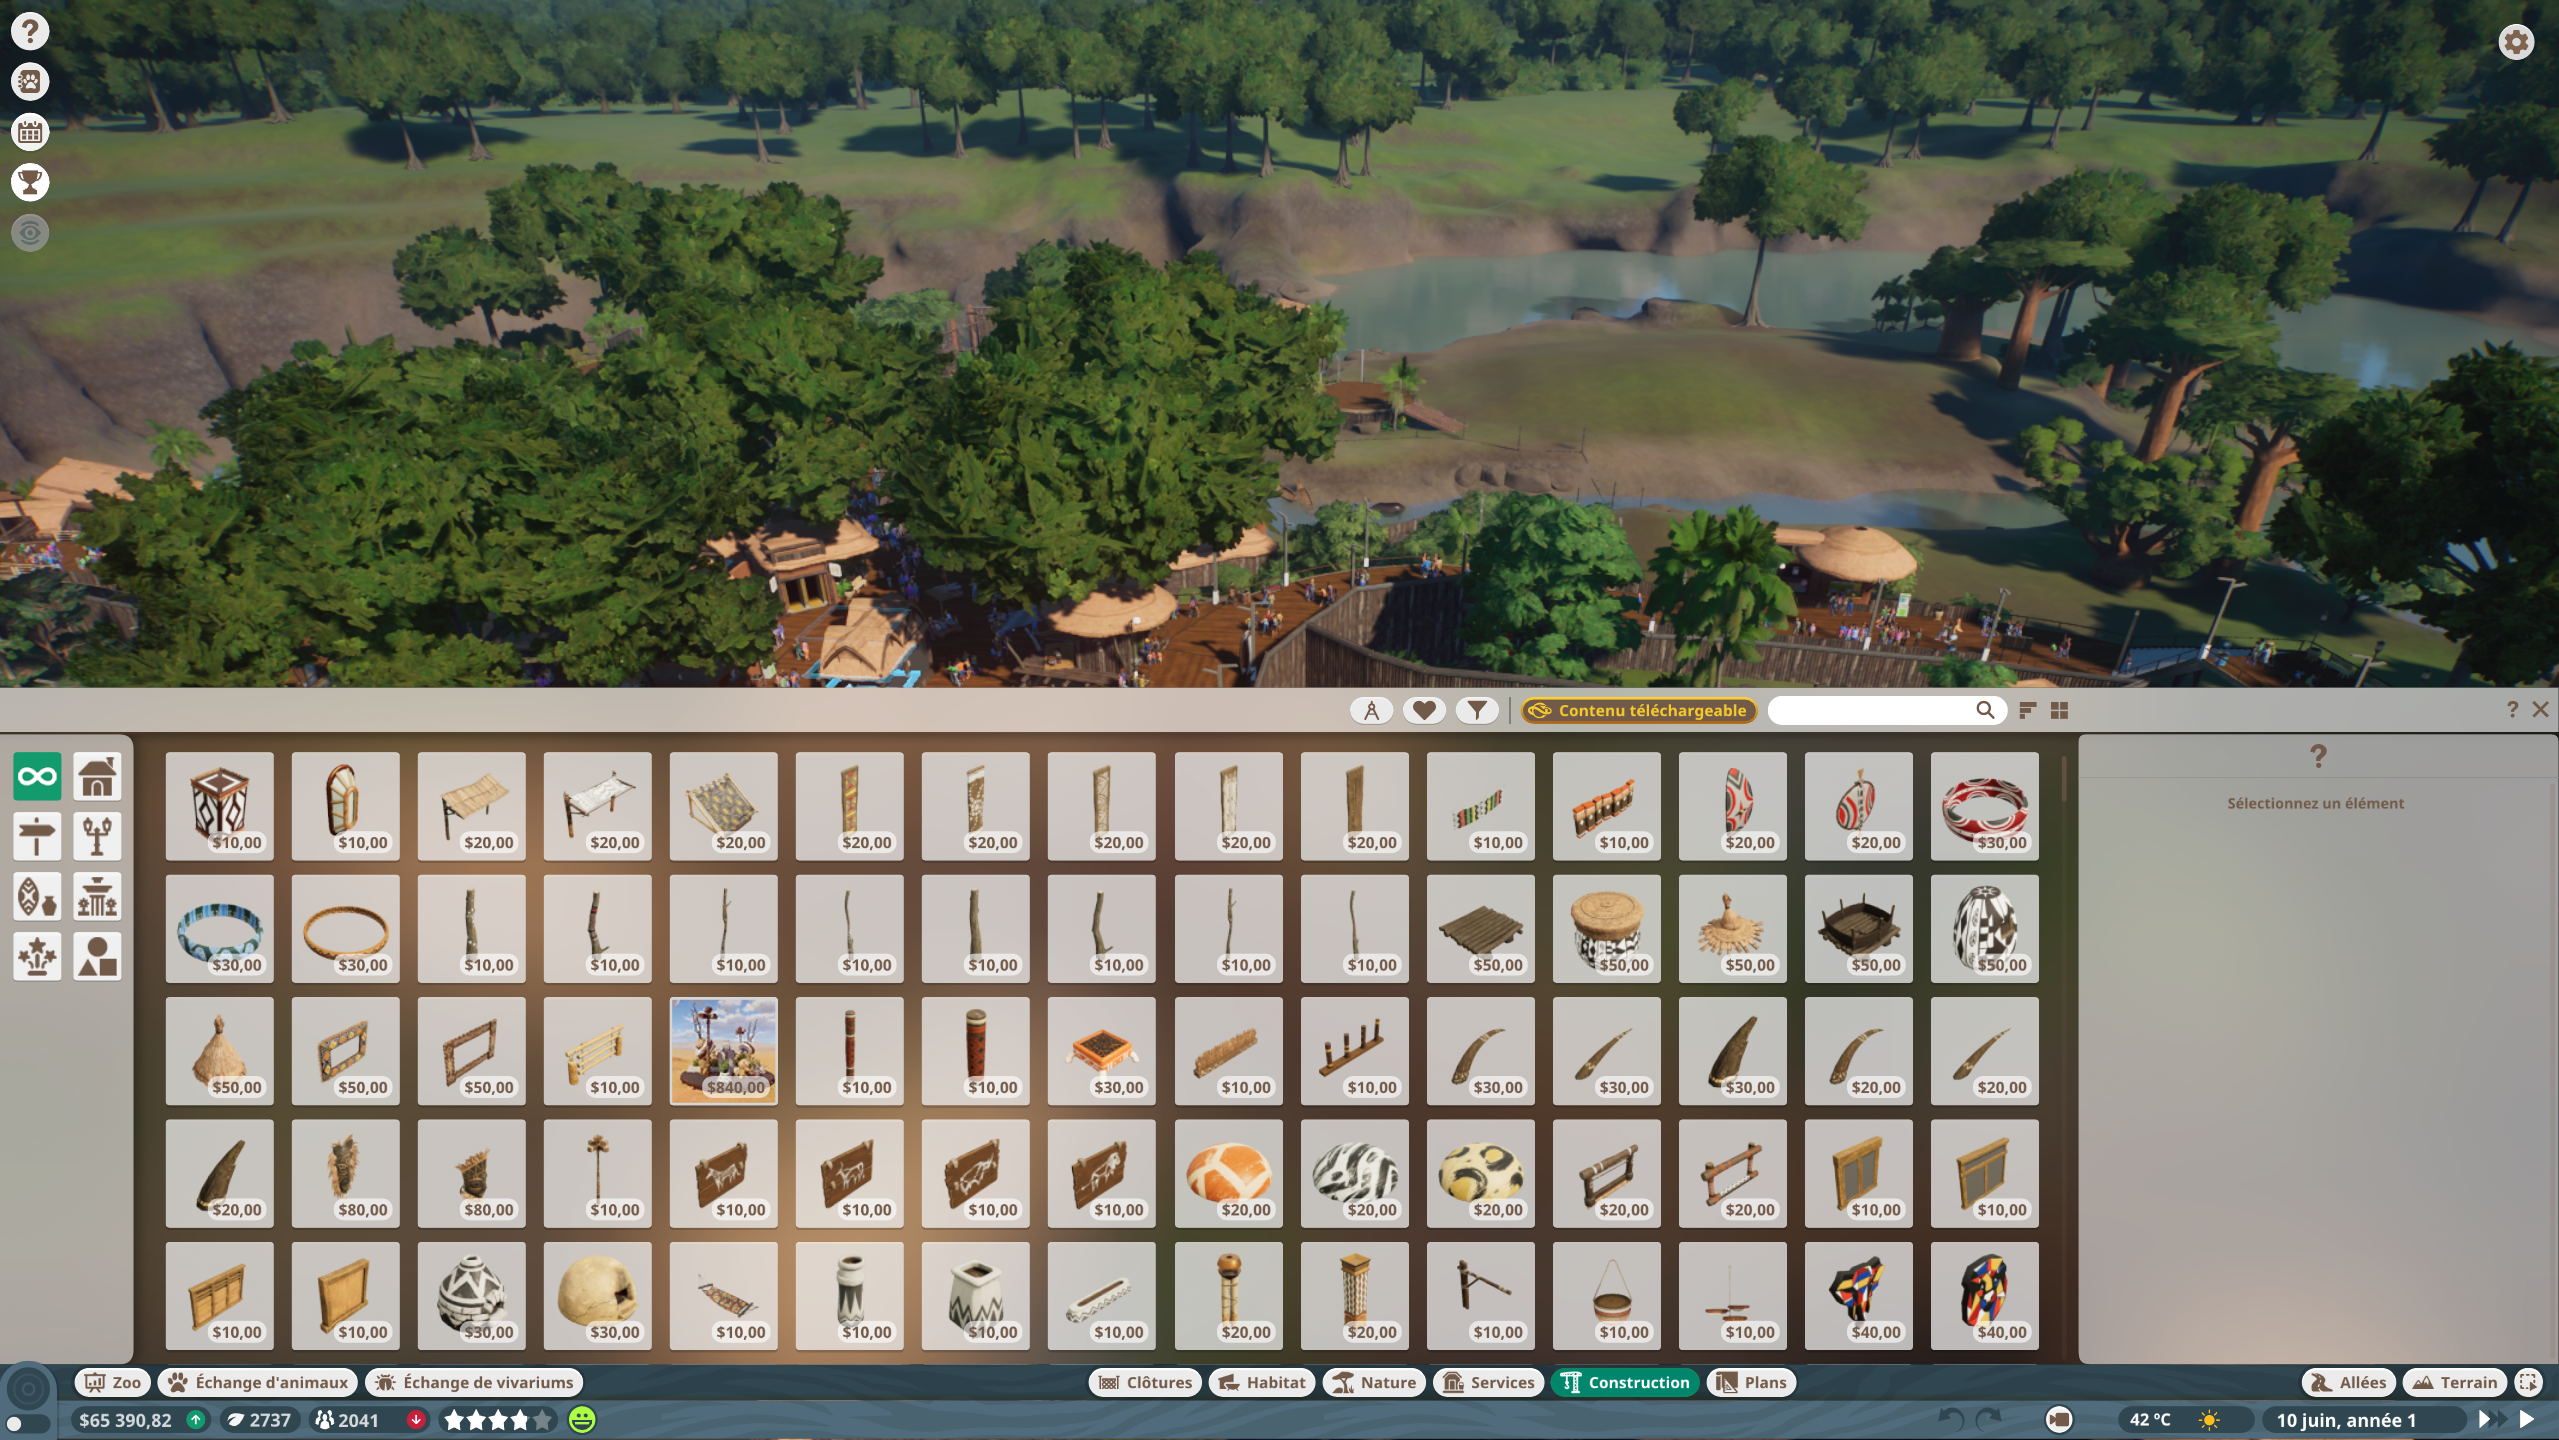 2.Planet Zoo construction